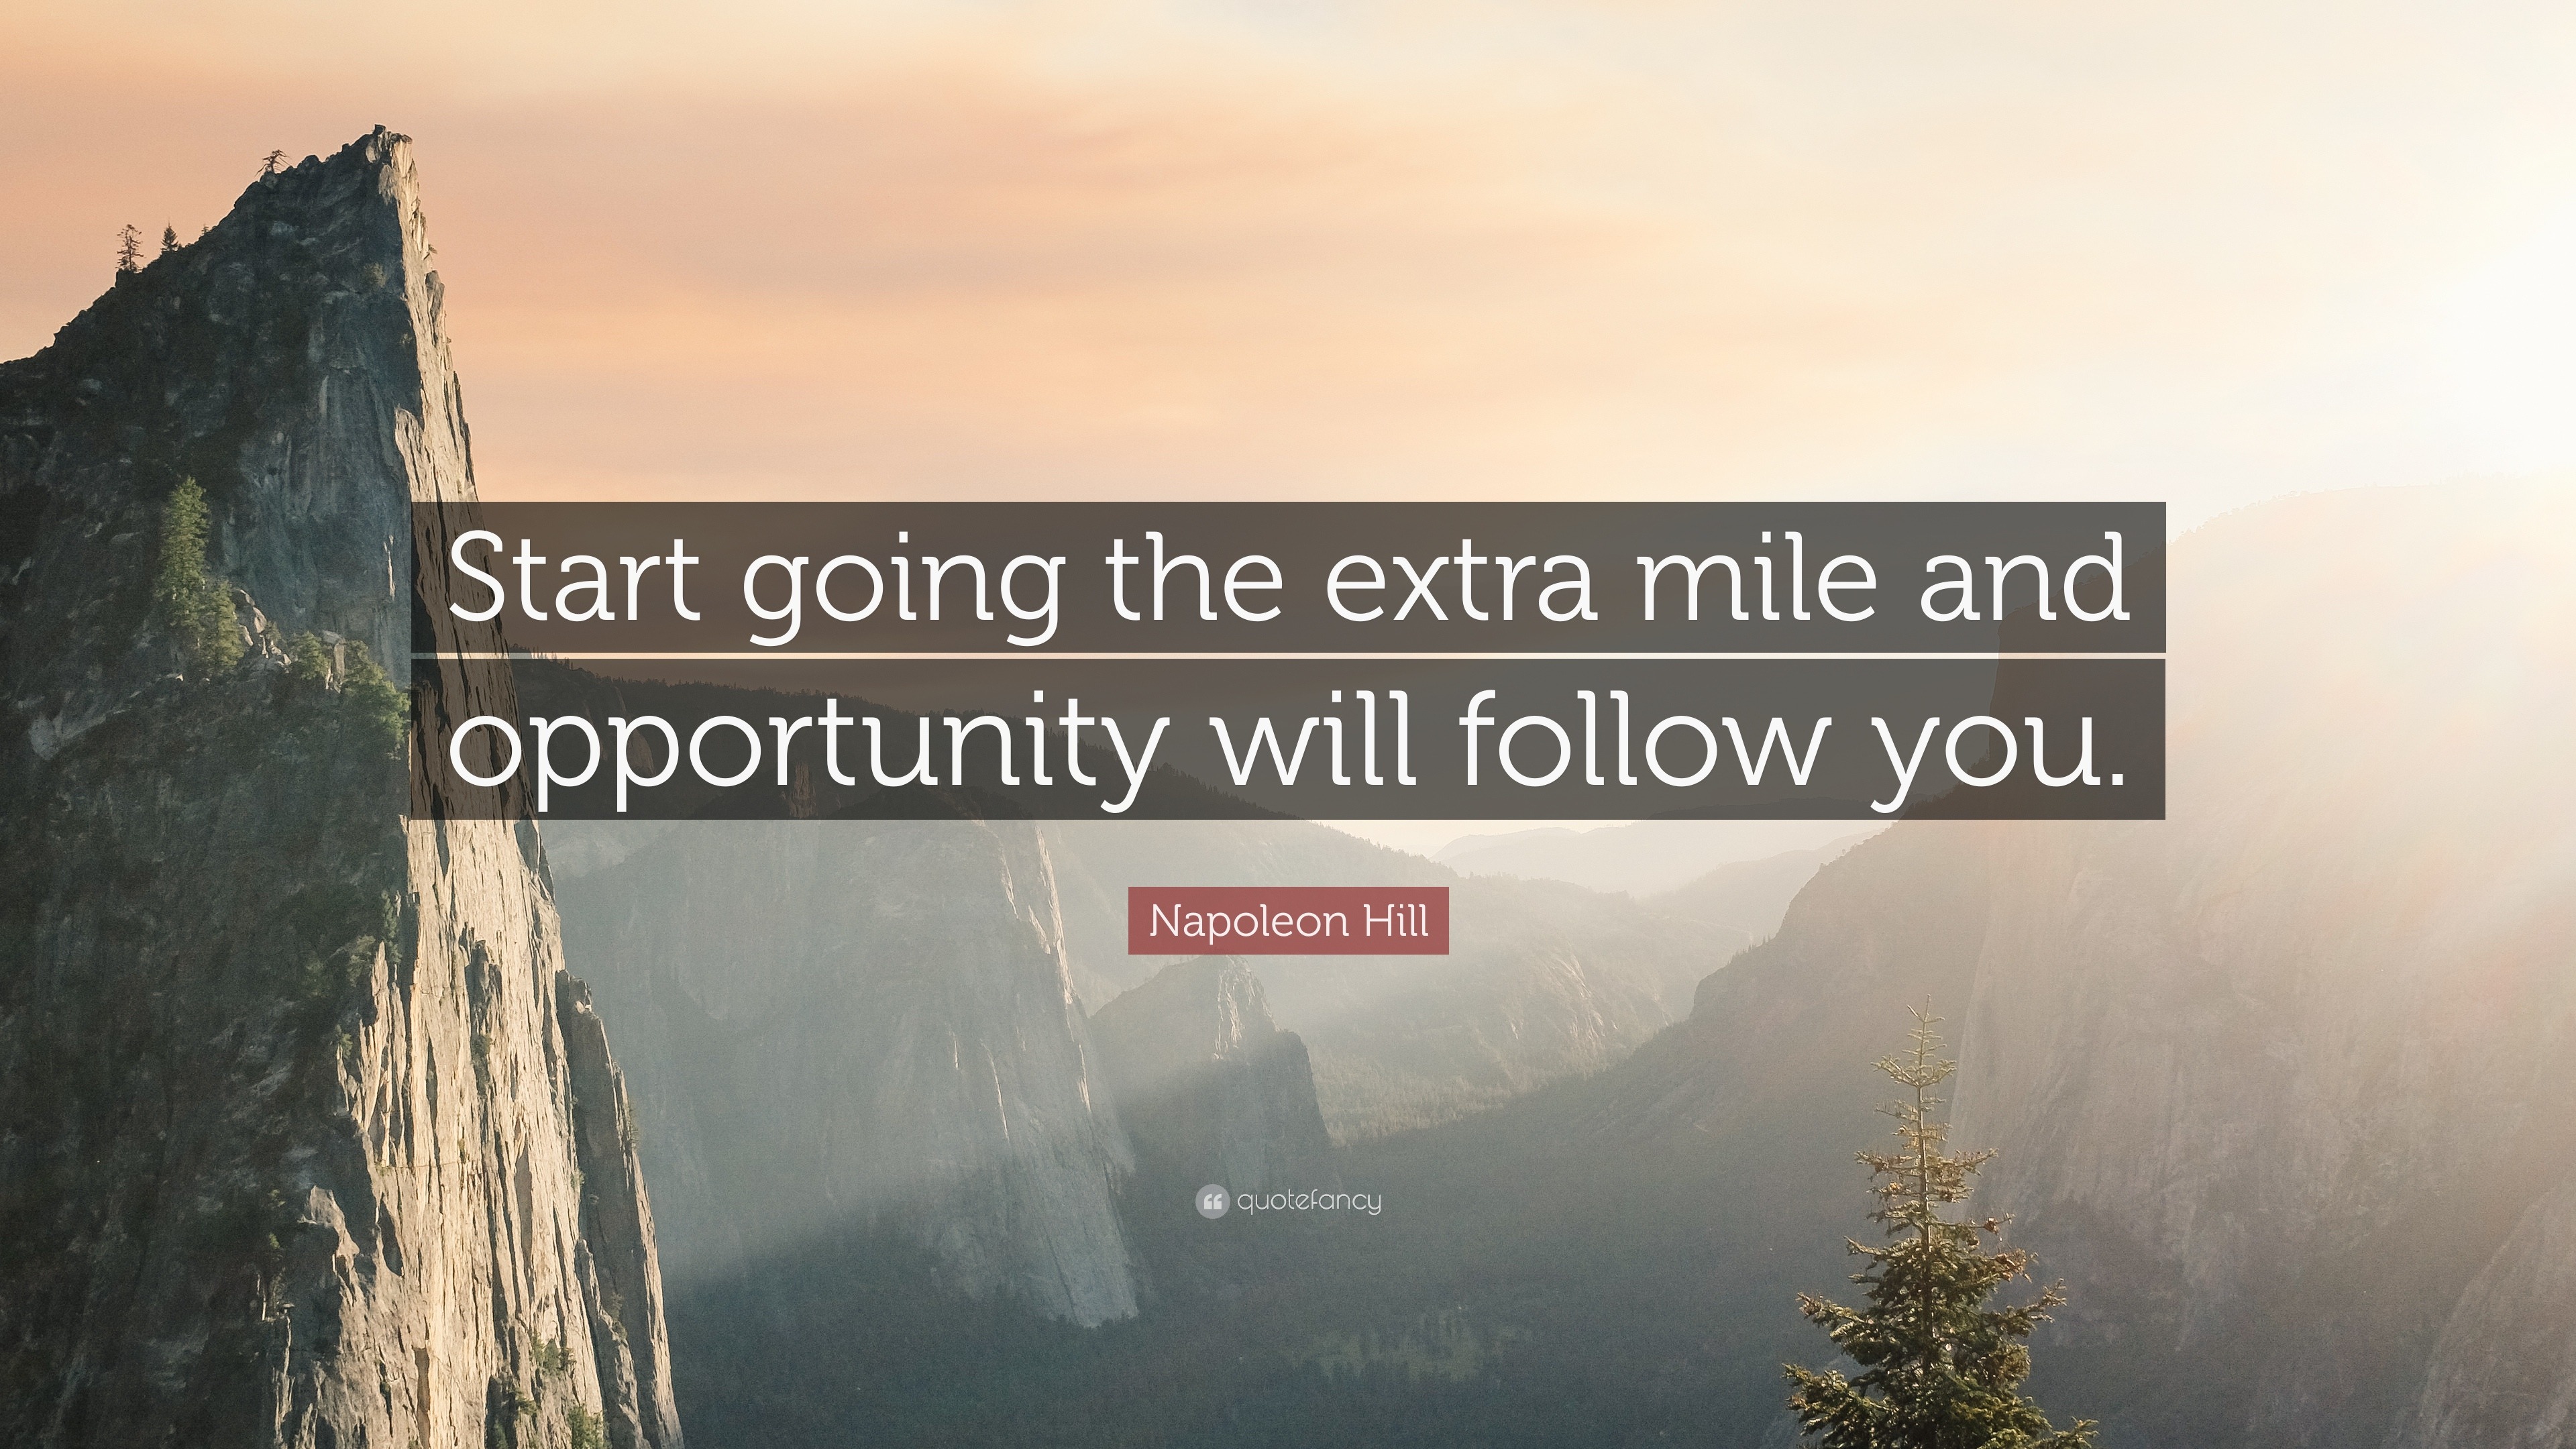 Napoleon Hill Quote: “Start going the extra mile and opportunity will